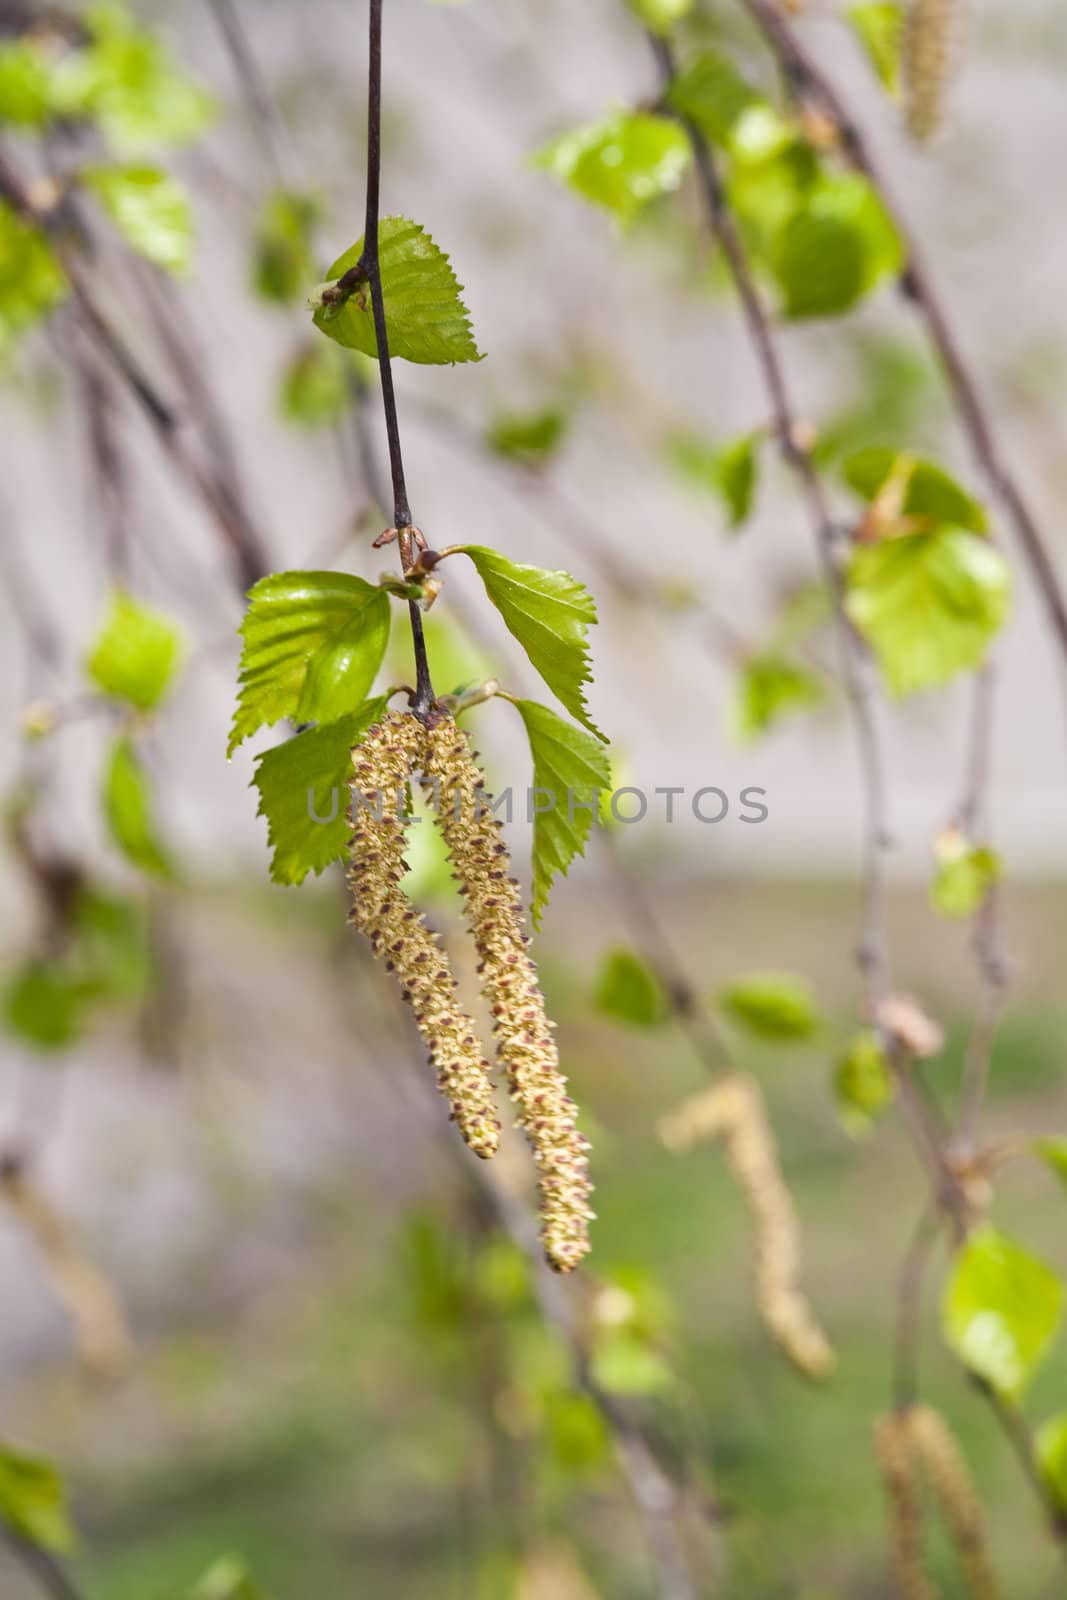 nature series: close up of spring birch leaf and bud